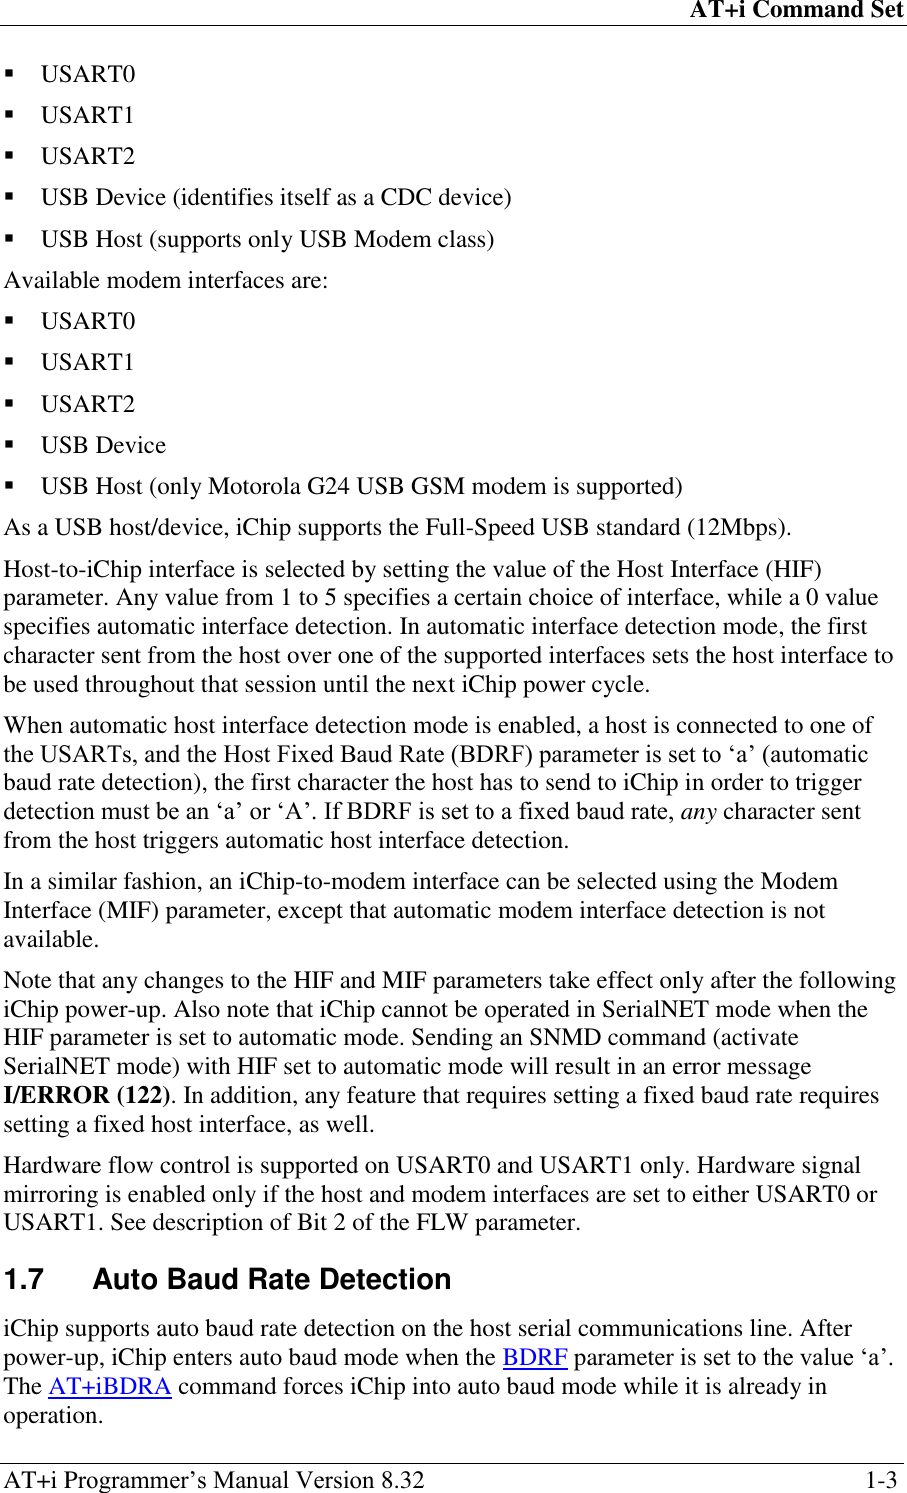 AT+i Command Set AT+i Programmer‘s Manual Version 8.32  1-3  USART0  USART1  USART2  USB Device (identifies itself as a CDC device)  USB Host (supports only USB Modem class) Available modem interfaces are:  USART0  USART1  USART2  USB Device  USB Host (only Motorola G24 USB GSM modem is supported) As a USB host/device, iChip supports the Full-Speed USB standard (12Mbps). Host-to-iChip interface is selected by setting the value of the Host Interface (HIF) parameter. Any value from 1 to 5 specifies a certain choice of interface, while a 0 value specifies automatic interface detection. In automatic interface detection mode, the first character sent from the host over one of the supported interfaces sets the host interface to be used throughout that session until the next iChip power cycle. When automatic host interface detection mode is enabled, a host is connected to one of the USARTs, and the Host Fixed Baud Rate (BDRF) parameter is set to ‗a‘ (automatic baud rate detection), the first character the host has to send to iChip in order to trigger detection must be an ‗a‘ or ‗A‘. If BDRF is set to a fixed baud rate, any character sent from the host triggers automatic host interface detection. In a similar fashion, an iChip-to-modem interface can be selected using the Modem Interface (MIF) parameter, except that automatic modem interface detection is not available. Note that any changes to the HIF and MIF parameters take effect only after the following iChip power-up. Also note that iChip cannot be operated in SerialNET mode when the HIF parameter is set to automatic mode. Sending an SNMD command (activate SerialNET mode) with HIF set to automatic mode will result in an error message I/ERROR (122). In addition, any feature that requires setting a fixed baud rate requires setting a fixed host interface, as well. Hardware flow control is supported on USART0 and USART1 only. Hardware signal mirroring is enabled only if the host and modem interfaces are set to either USART0 or USART1. See description of Bit 2 of the FLW parameter. 1.7  Auto Baud Rate Detection iChip supports auto baud rate detection on the host serial communications line. After power-up, iChip enters auto baud mode when the BDRF parameter is set to the value ‗a‘. The AT+iBDRA command forces iChip into auto baud mode while it is already in operation. 